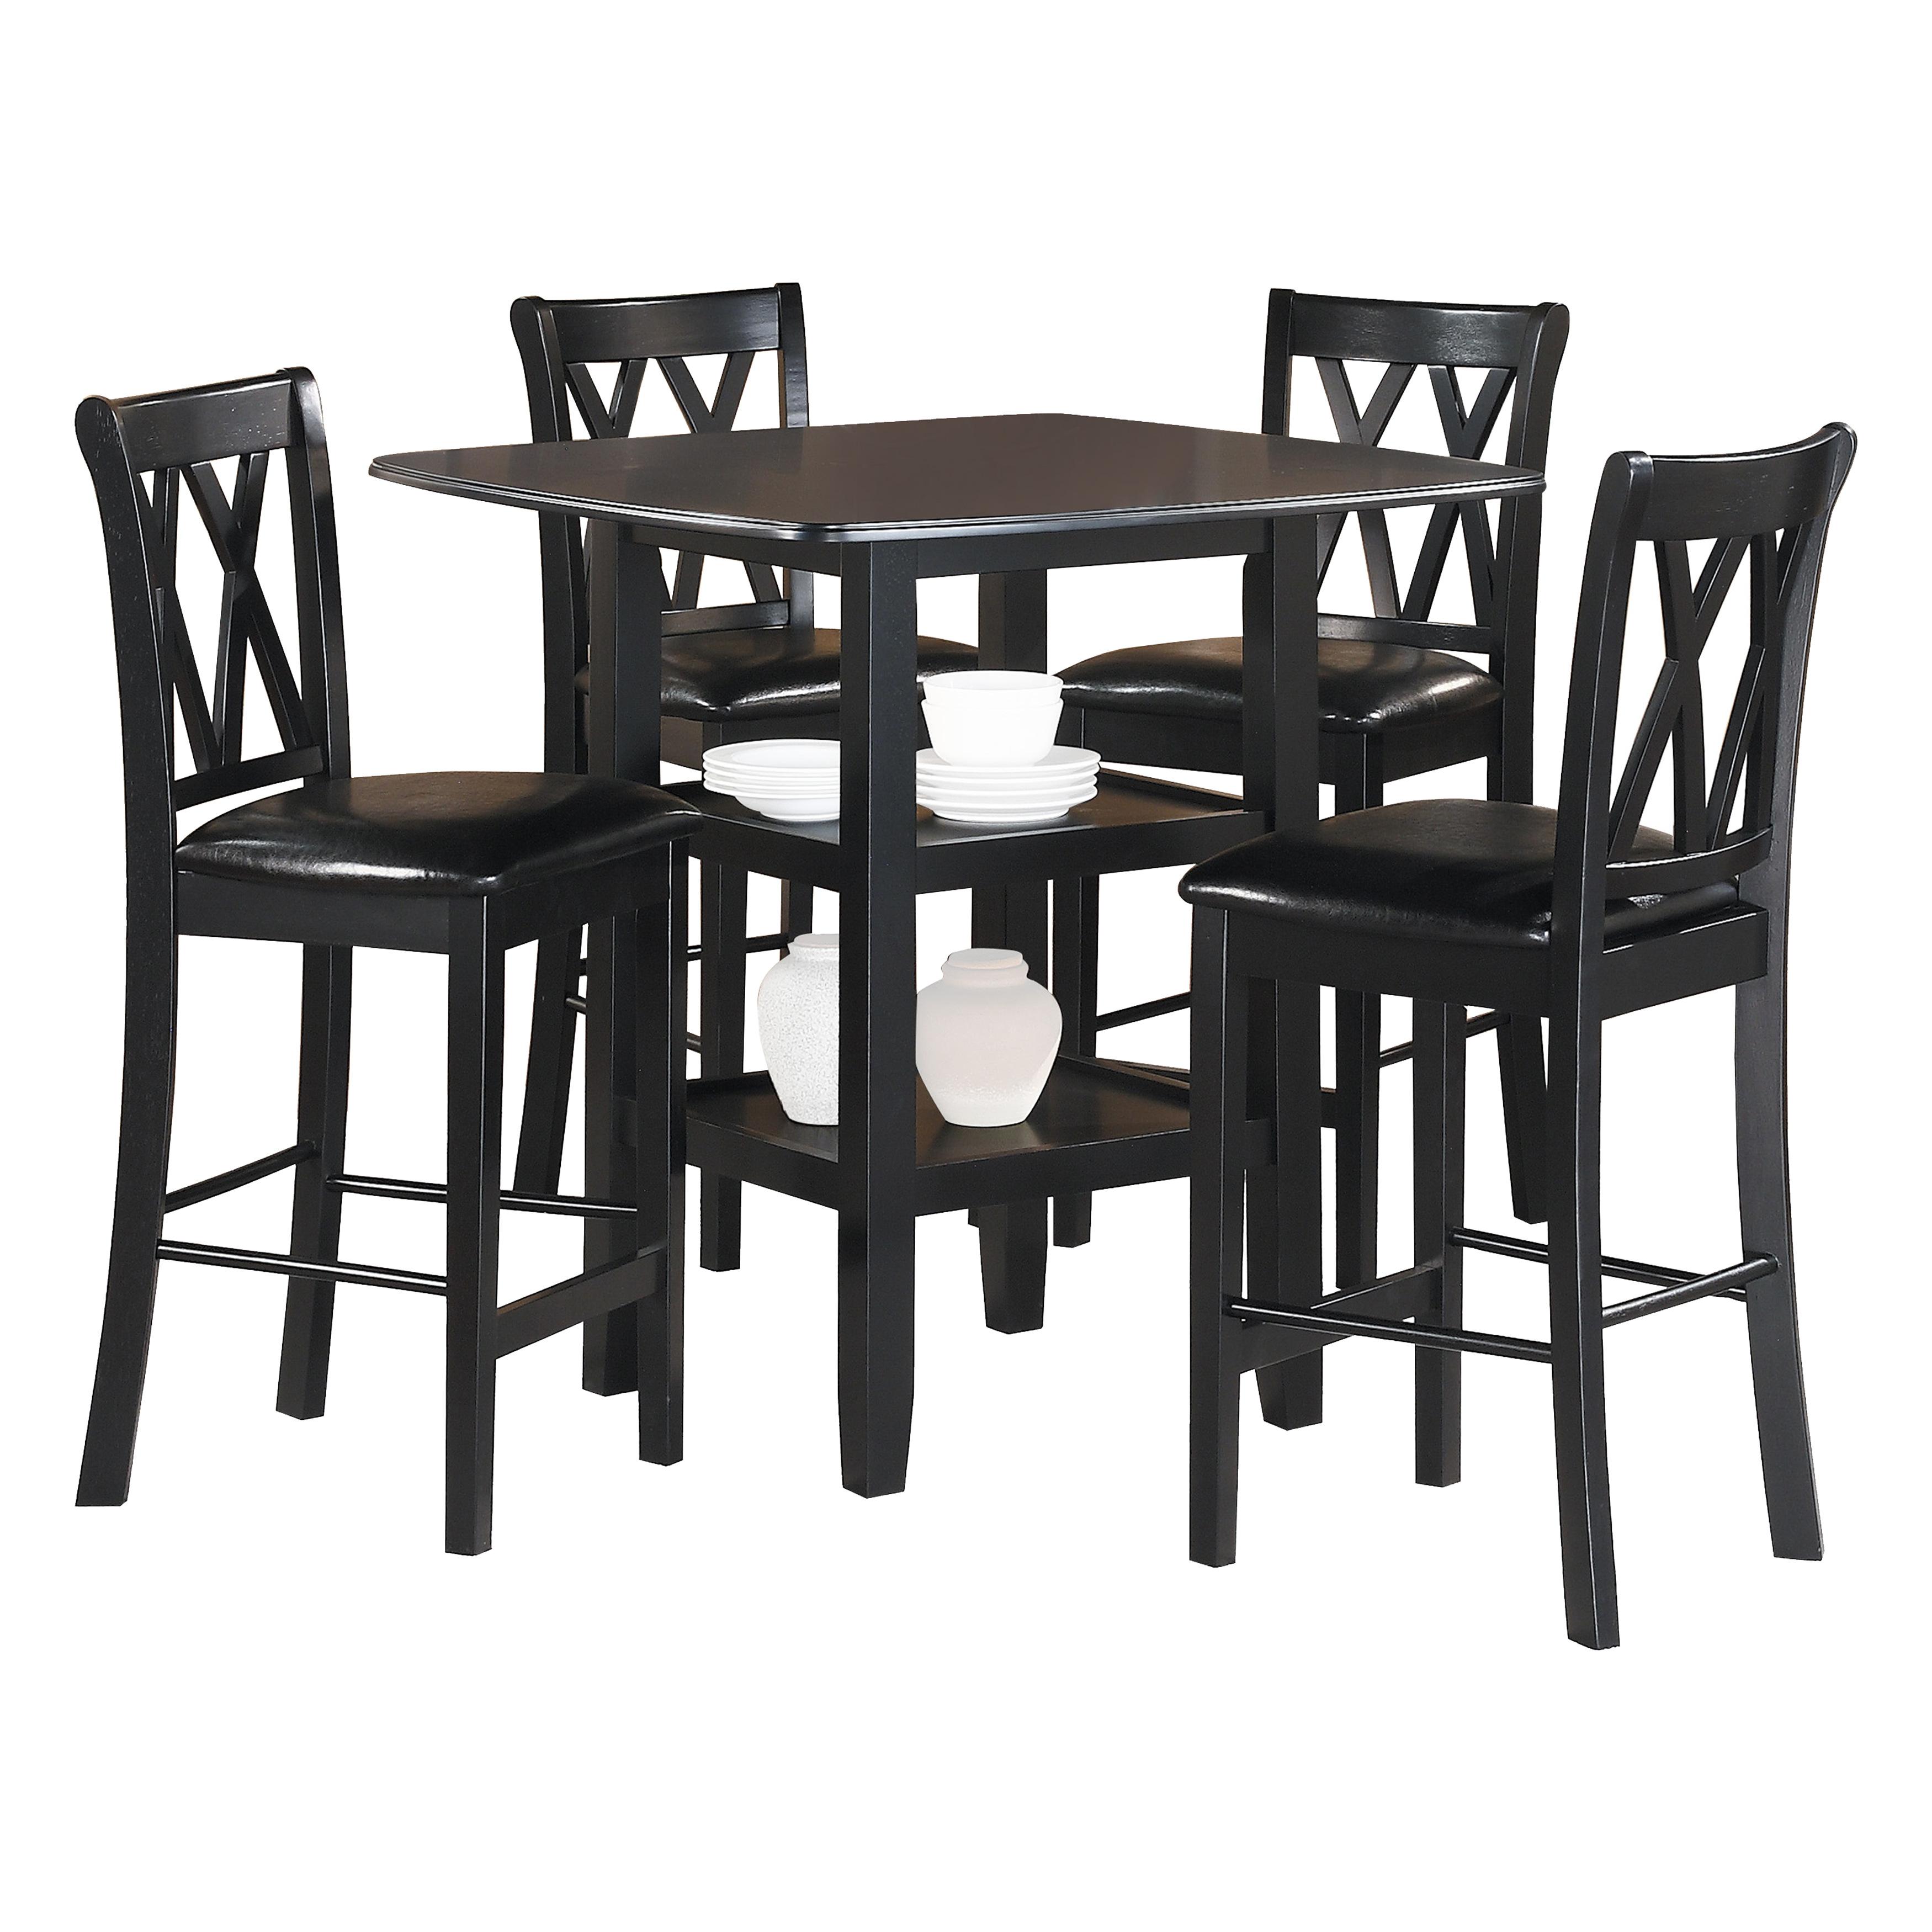 Transitional Counter Height Set 2514BK-36 Norman 2514BK-36 in Black Faux Leather